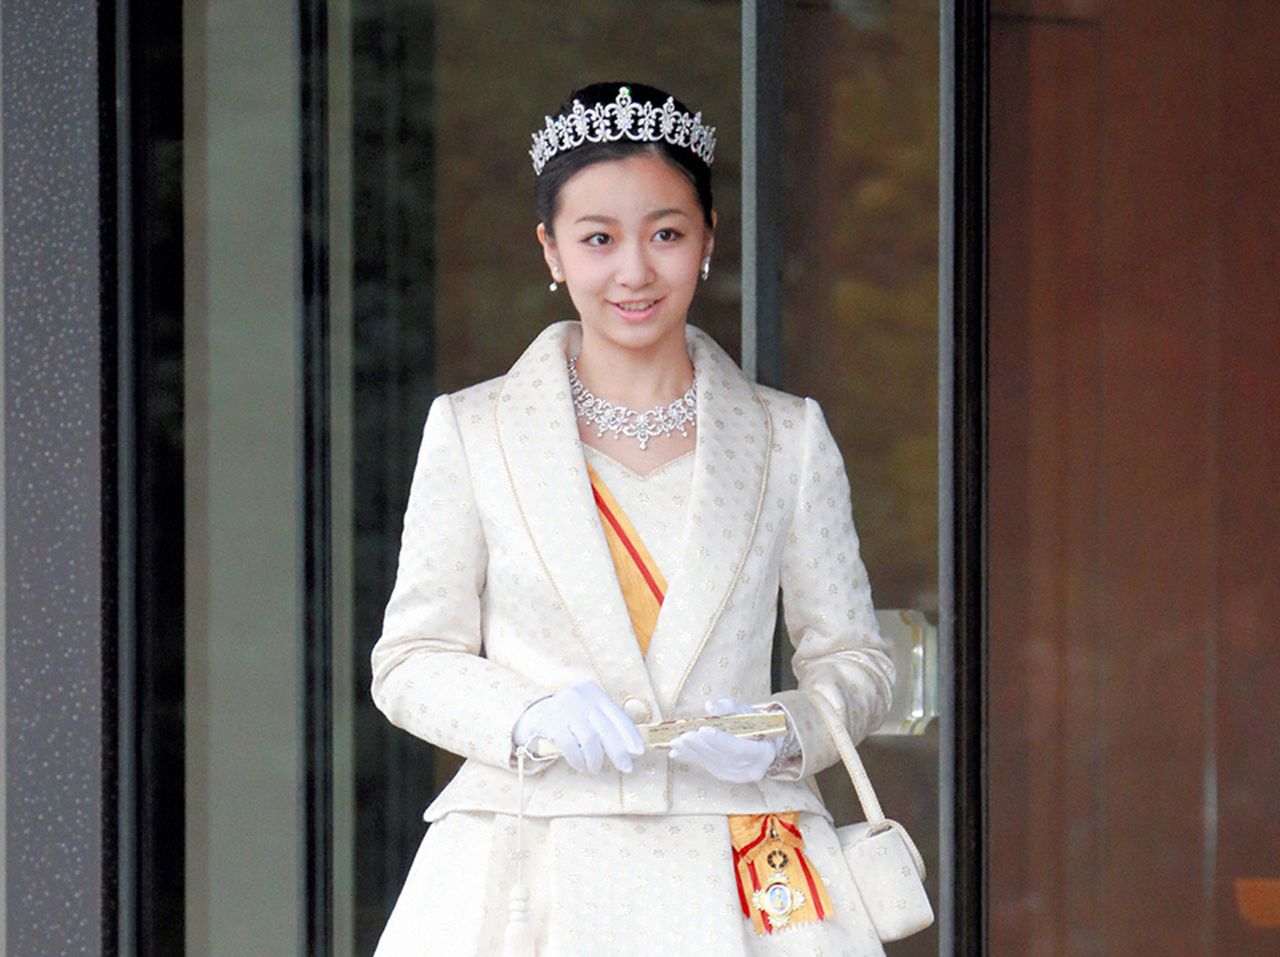 Princess Kako of Akishino attends her 20th birthday celebration at the Imperial Palace on December 29, 2014 in Tokyo. Kako, granddaughter of Emperor Akihito, prayed at the Three Palace Sanctuaries in the palace grounds, after which Emperor Akihito bestowed her with a decoration known as the Grand Cordon of the Order of the Precious Crown.  